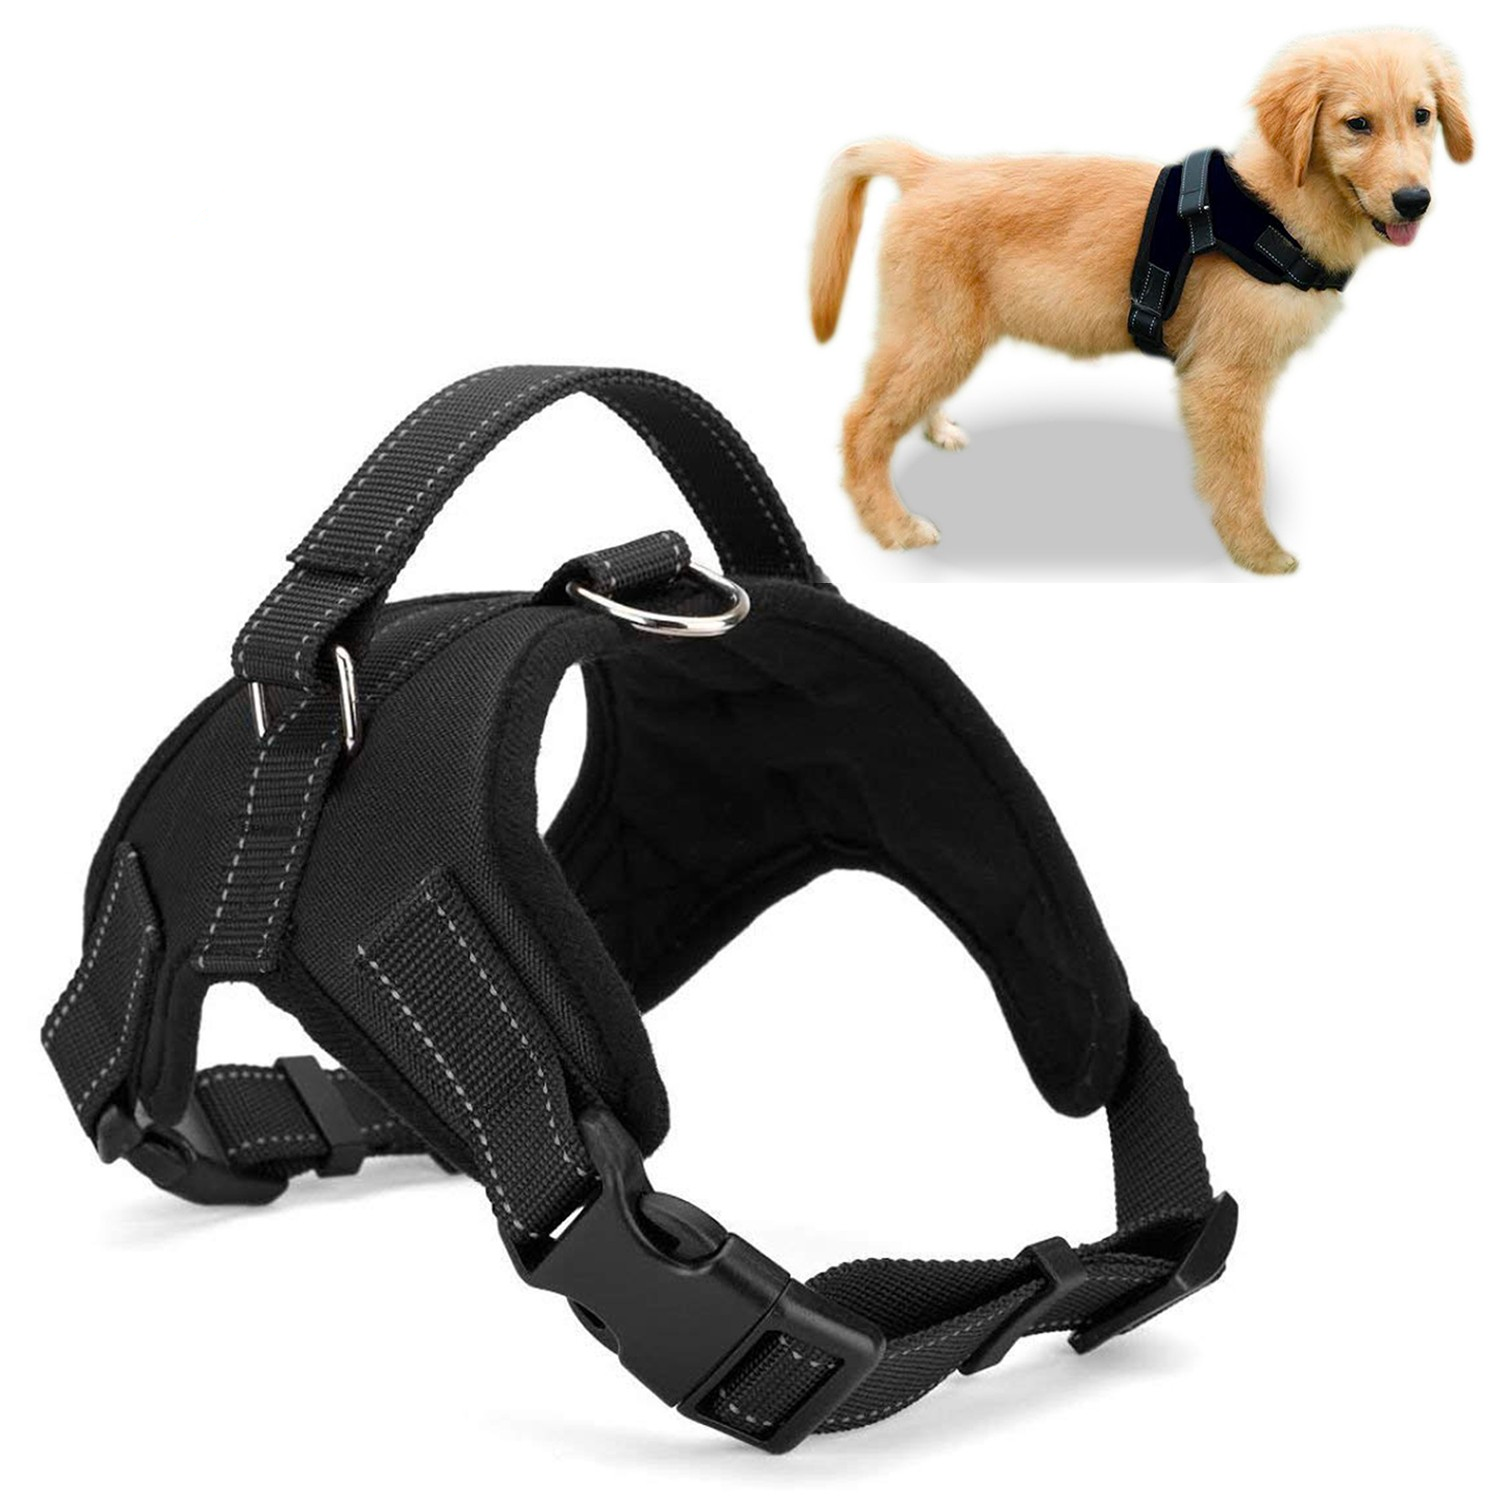 Heavy Duty Adjustable Pet Puppy Dog Safety Harness with Leash Lead Set Reflective No Pull Breathable Padded Dog Leash Collar Chest Harness Vest with Handle for Small Medium Large Dogs Training Walking